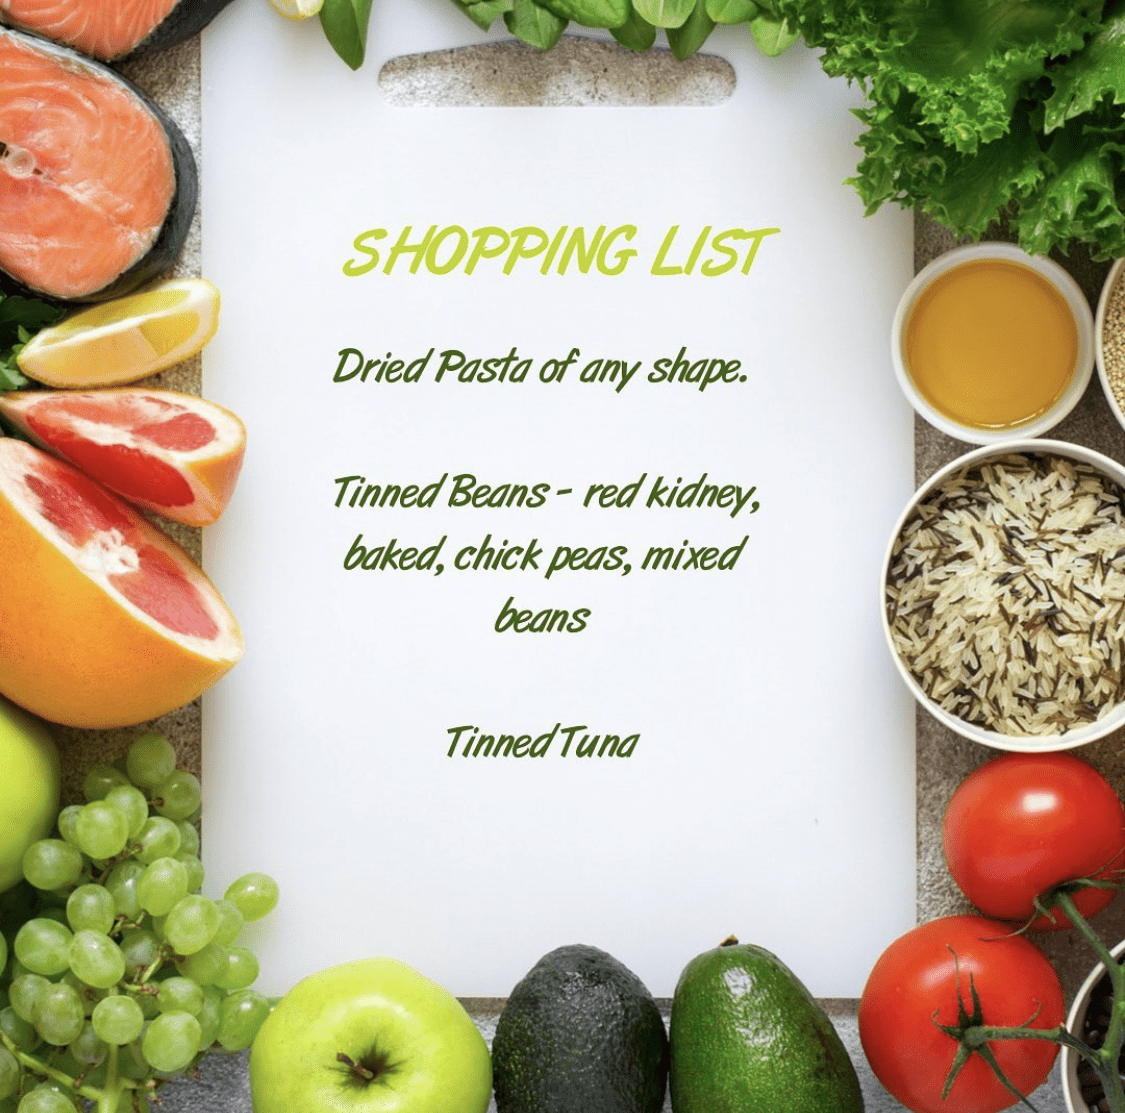 Shopping list for healthy store cupboard ingredients